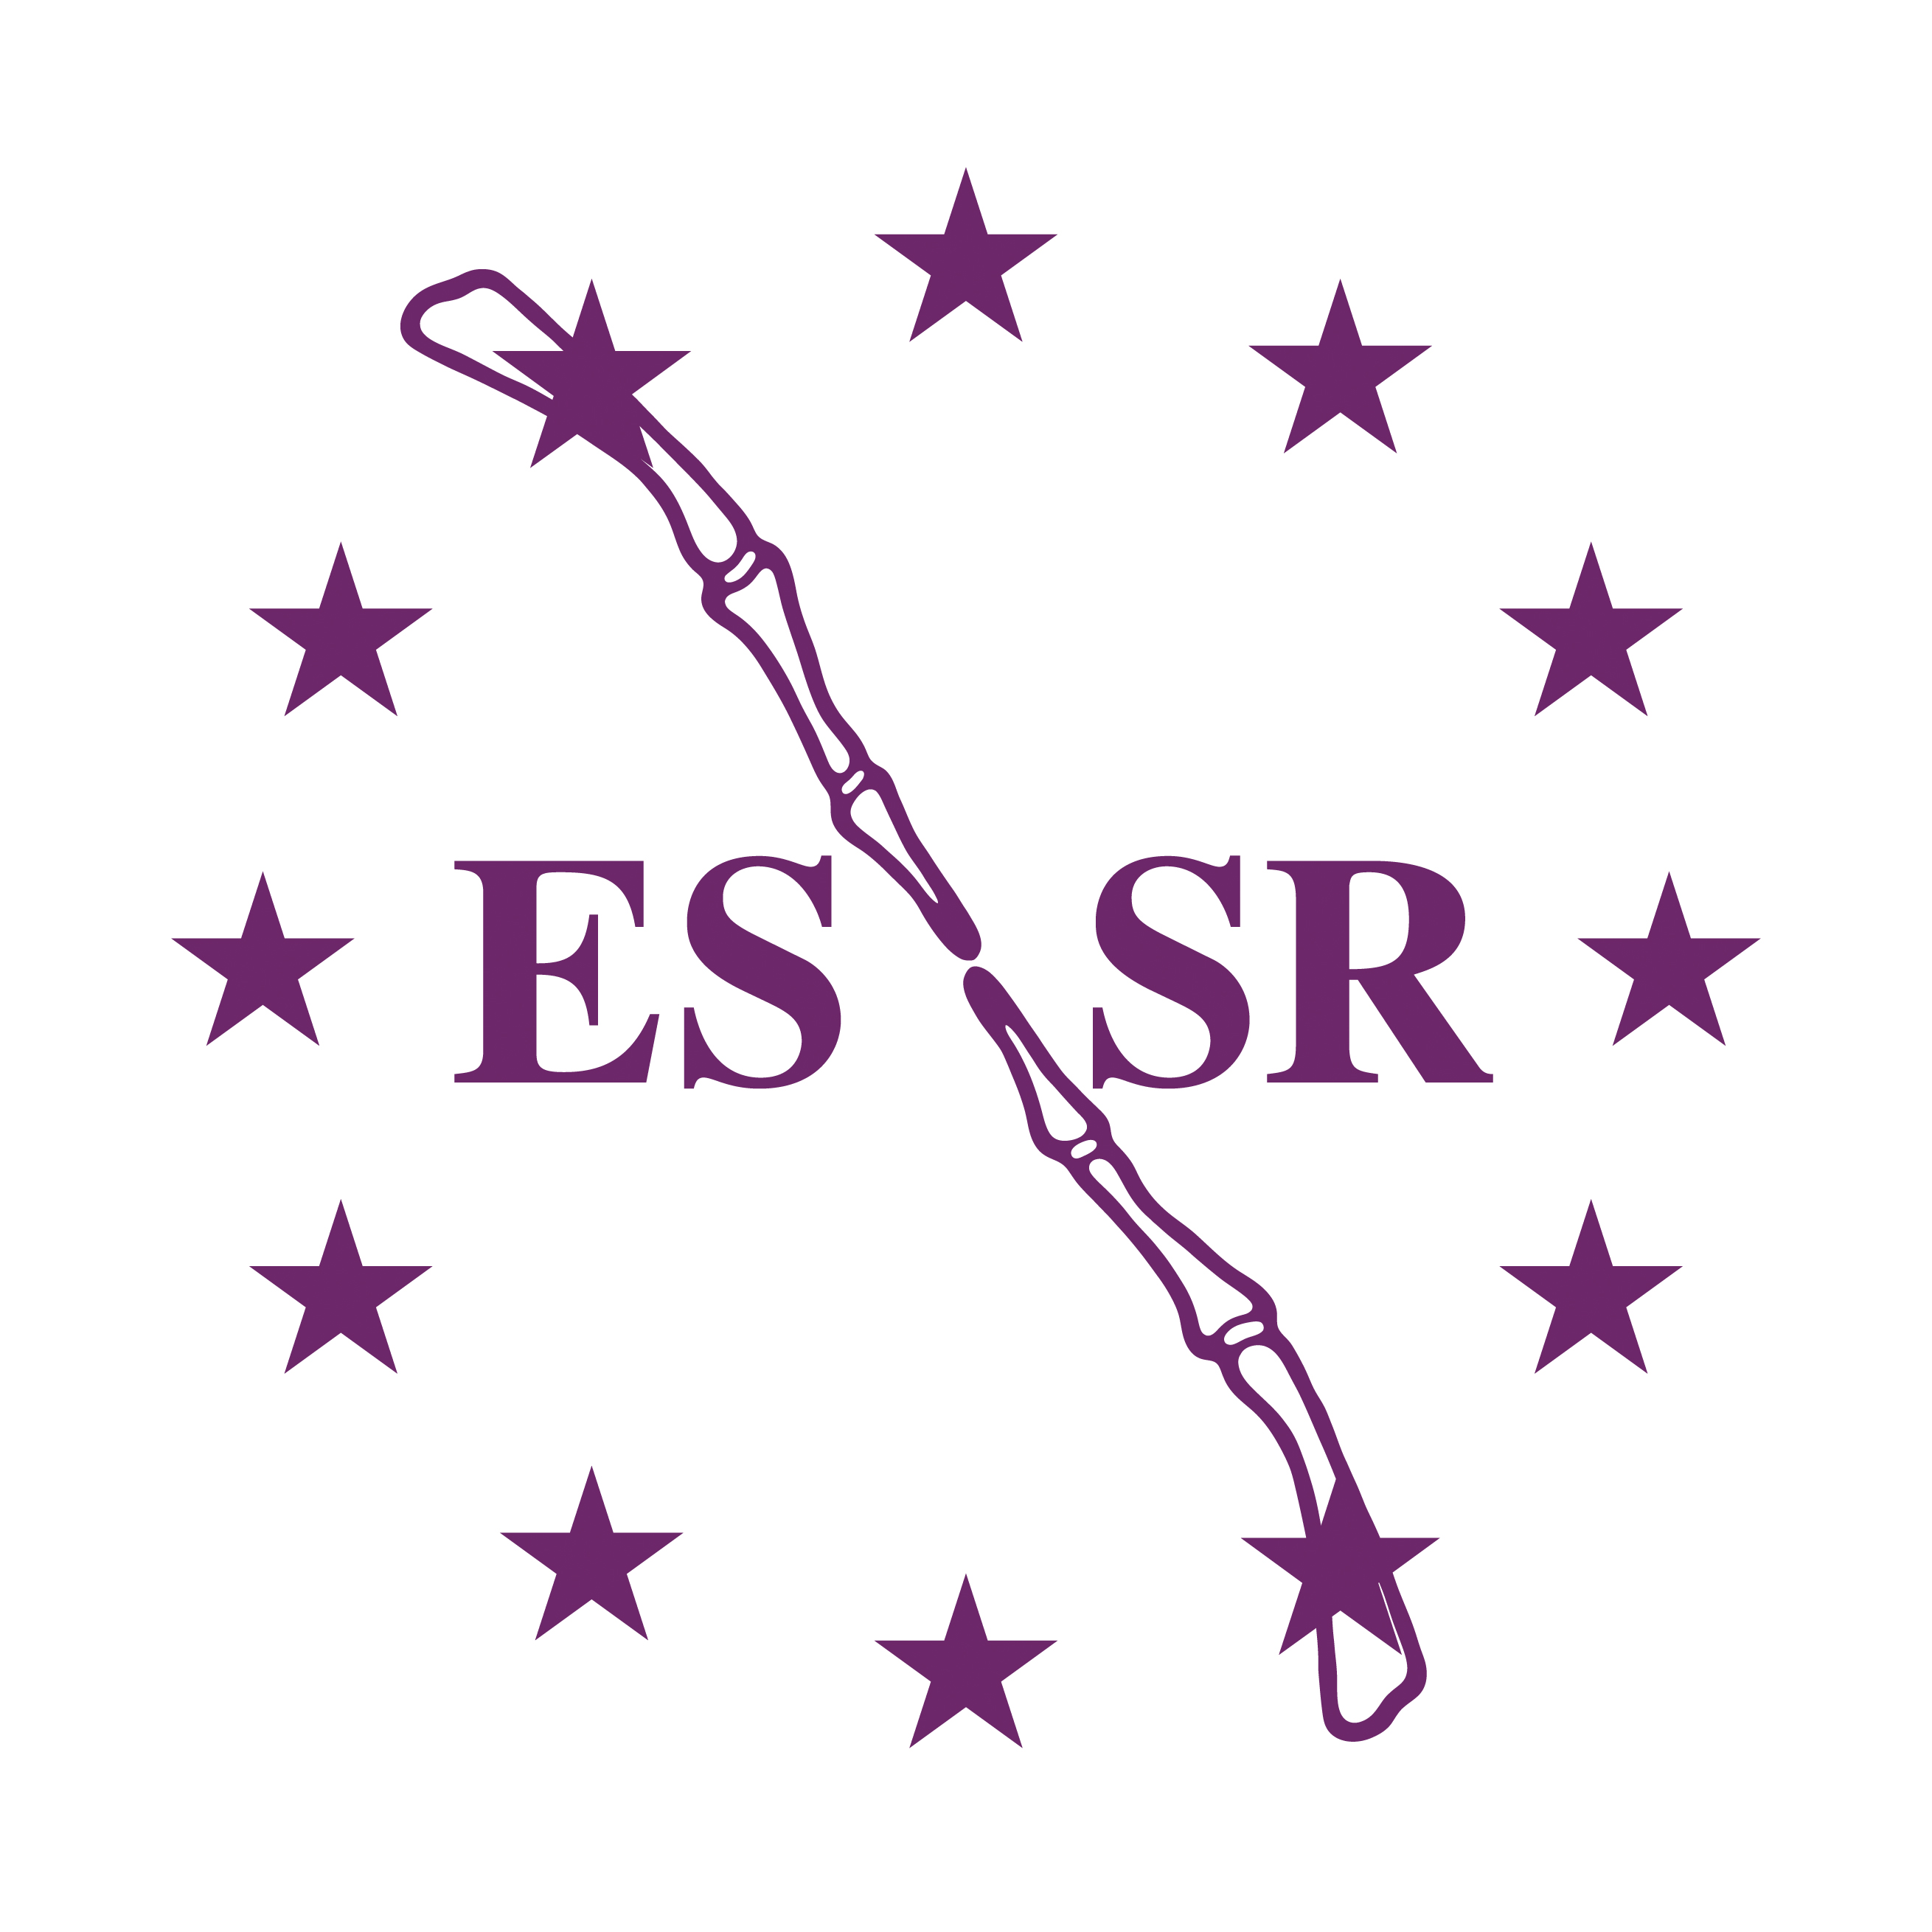 ESSR 2021 ONLINE - Annual Scientific Meeting of The European Society of Musculoskeletal Radiology